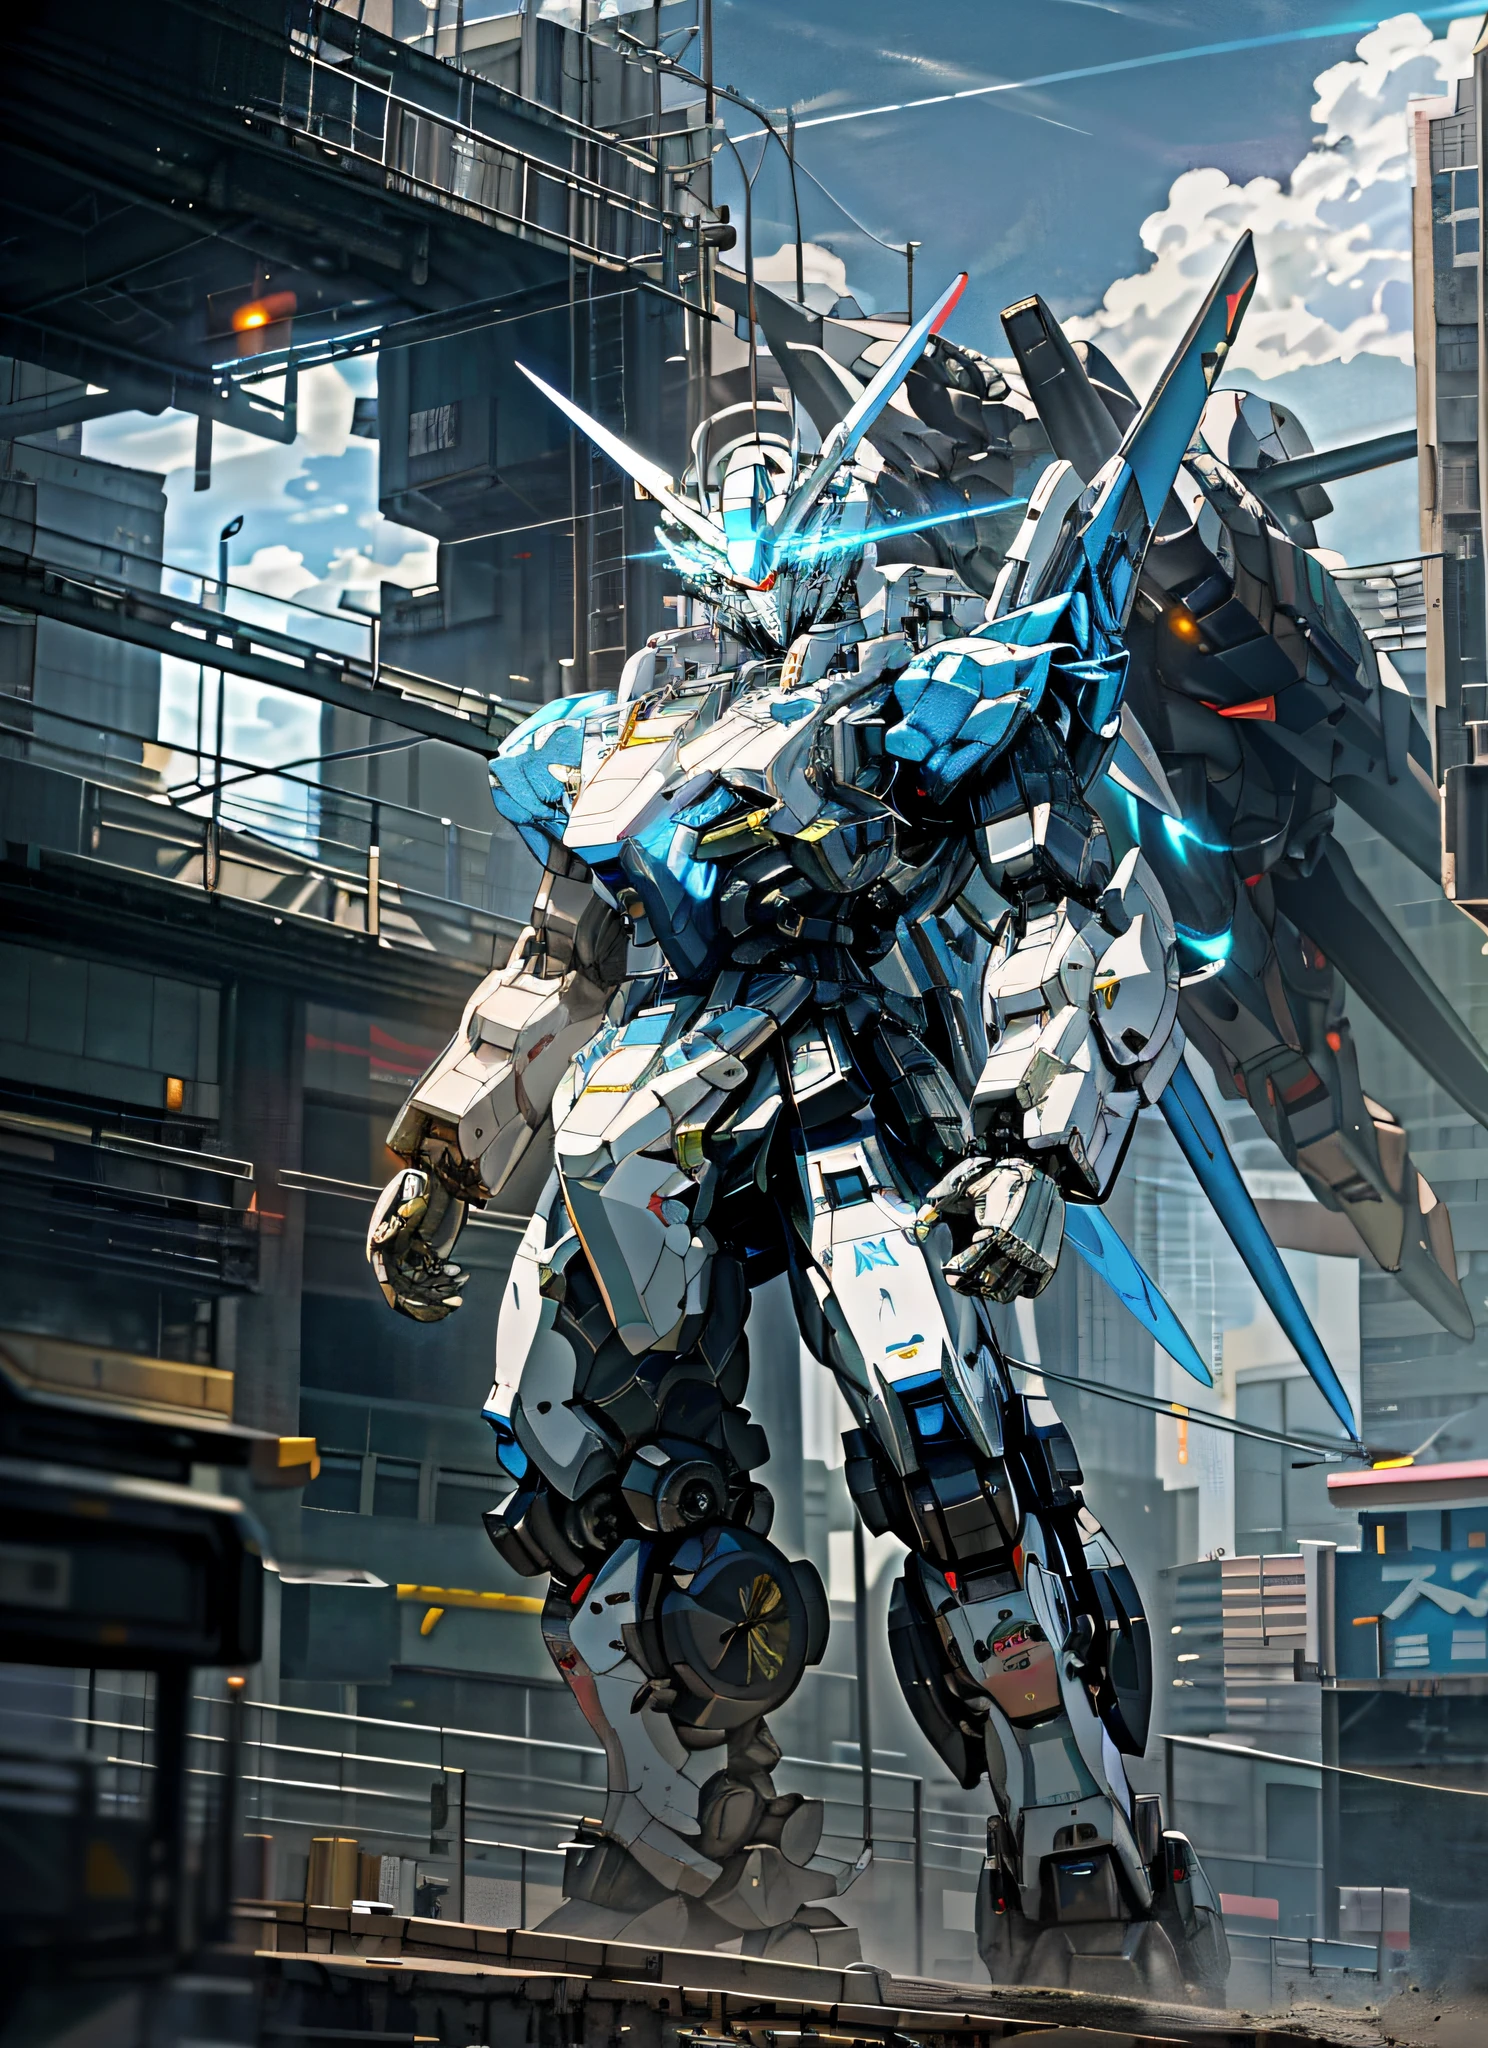 there is a robot that is standing in the street, cool mecha style, alexandre ferra white mecha, mecha art, modern mecha anime, anime mecha aesthetic, alexandre ferra mecha, mecha inspired, white mecha, an anime large mecha robot, cyber mech, mecha asthetic, high quality digital concept art, mecha anime